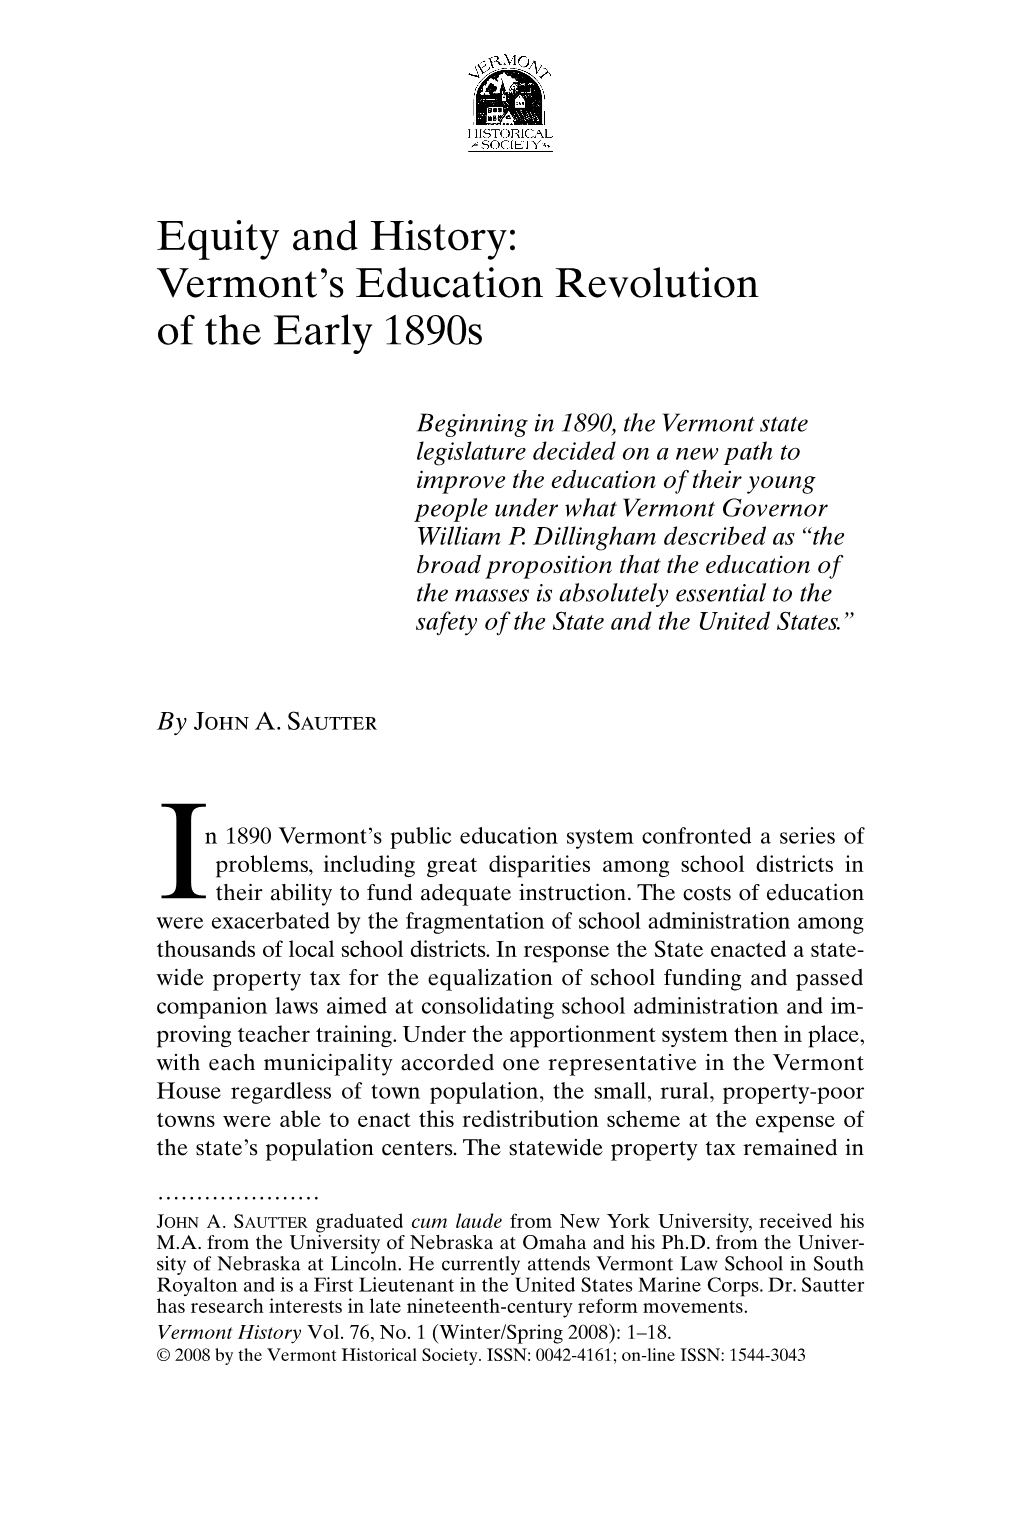 Equity and History: Vermont's Education Revolution of the Early